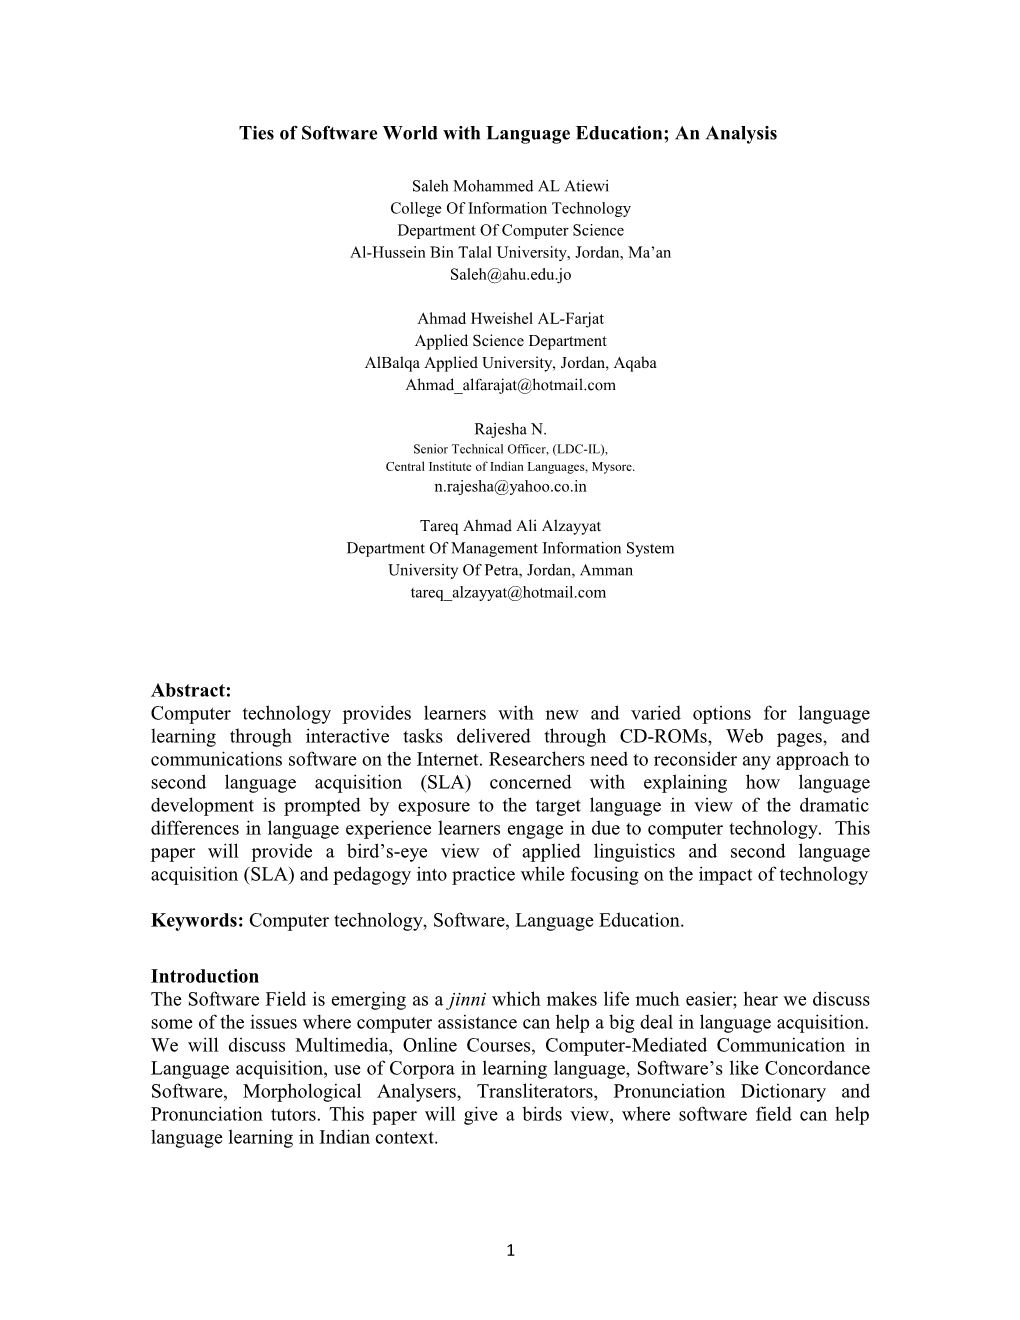 Ties of Software World with Language Education; an Analysis